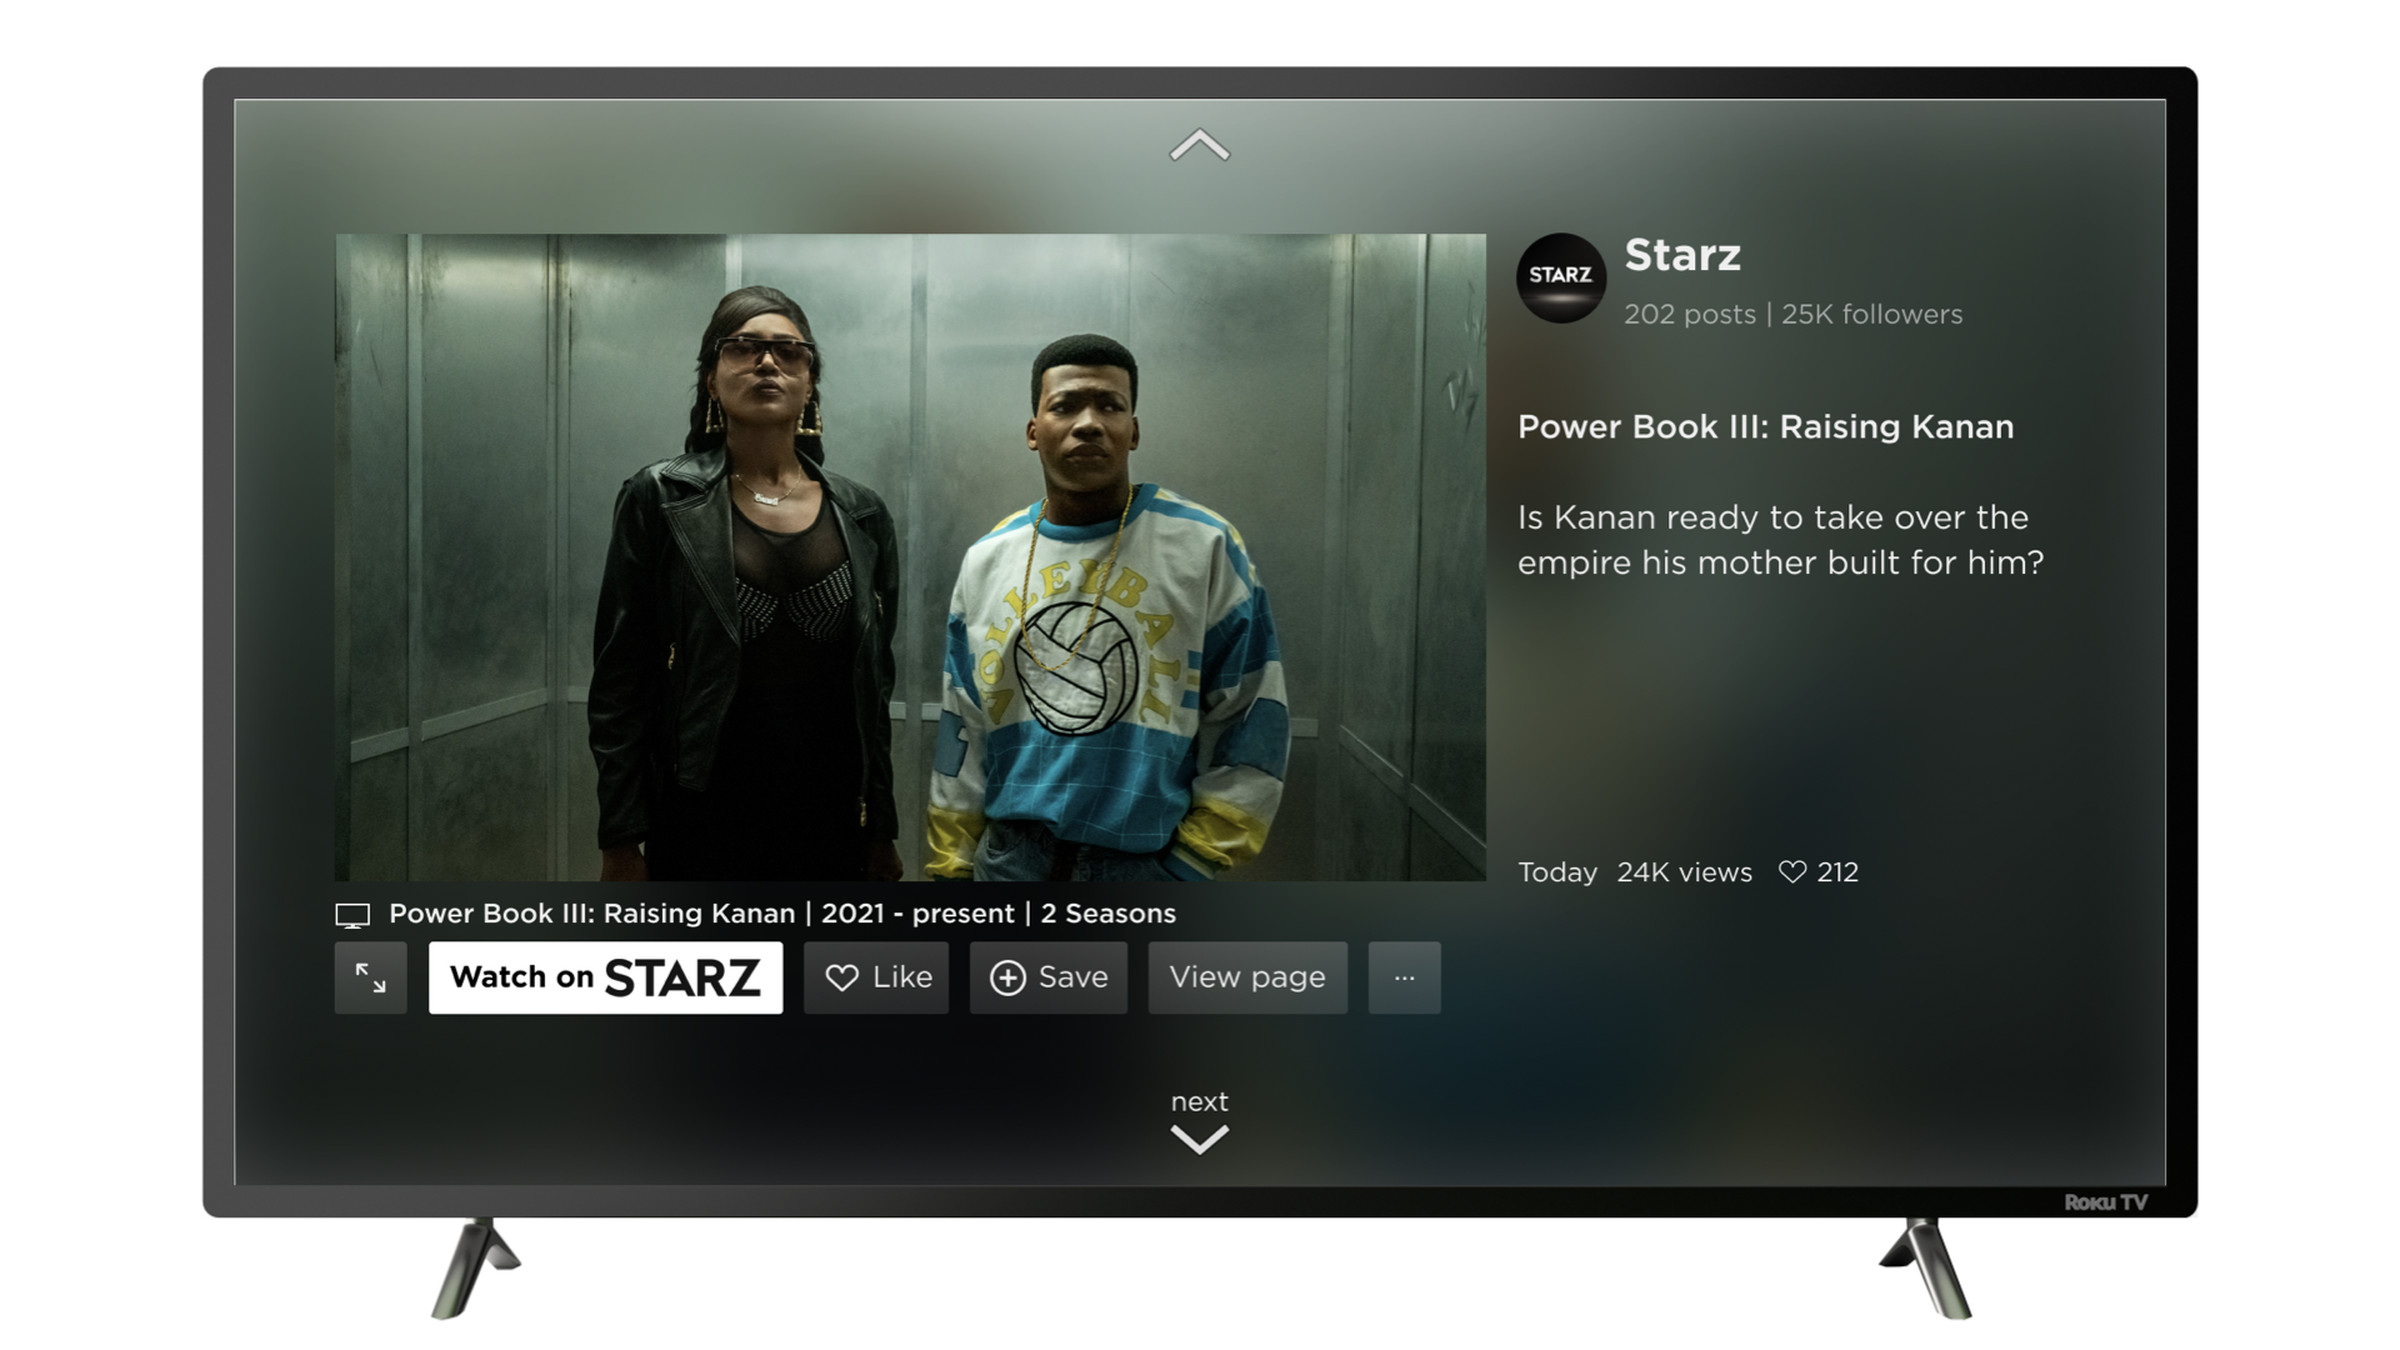 The Buzz is a new hub for discovering TV shows and movies.